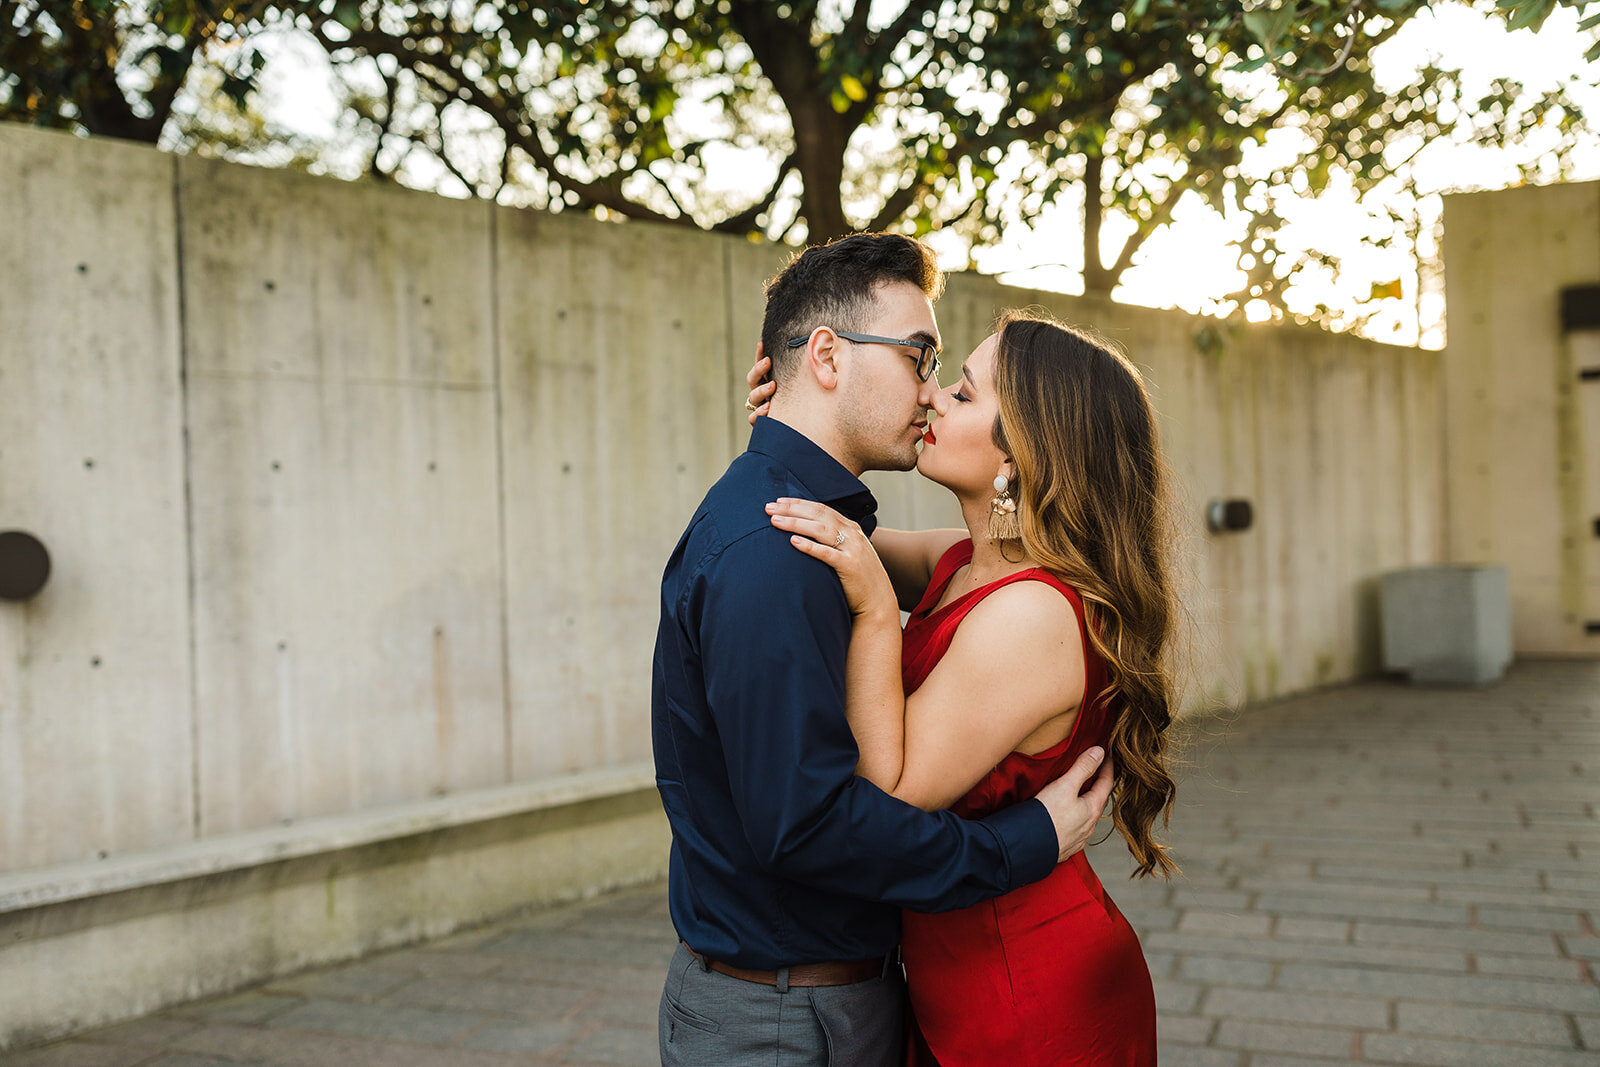 Kori+Tommy_Memorial Park and Downtown Houston Engagements_28